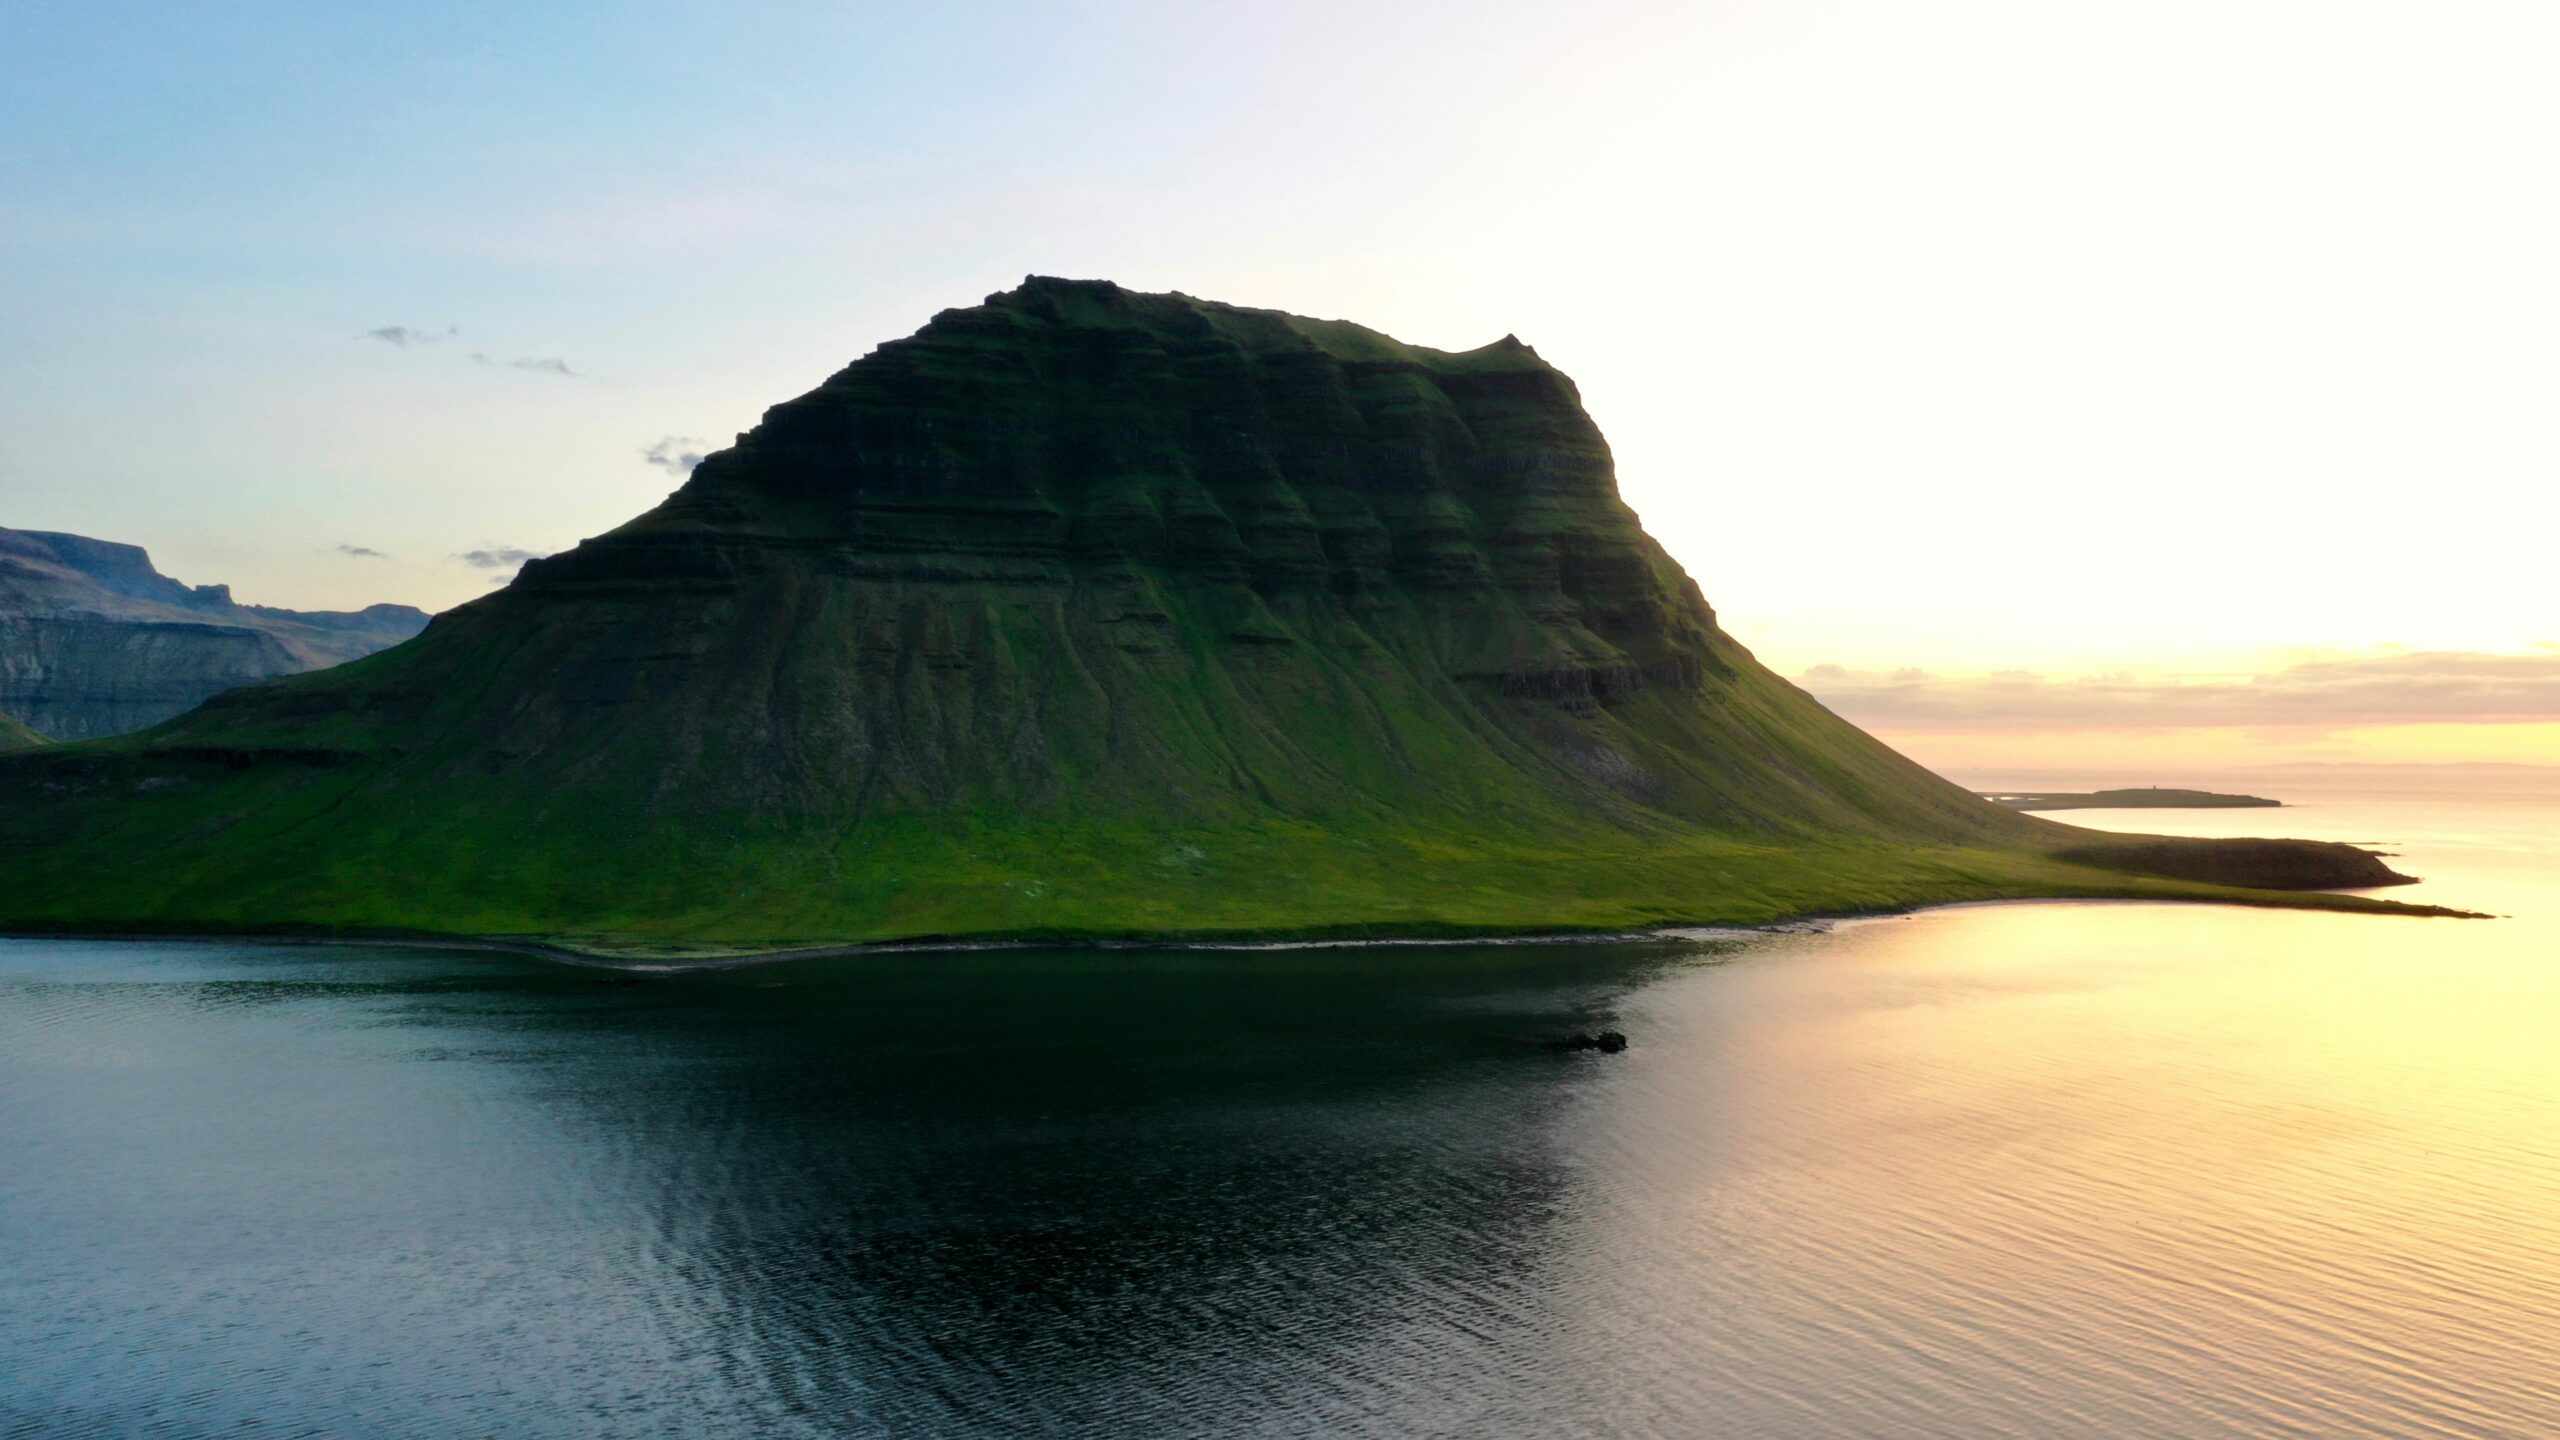 The Midnight Sun is a phenomenon in Iceland that travelers will not miss if they visit in August.
pictured: a lush green mountain during sunset in Iceland